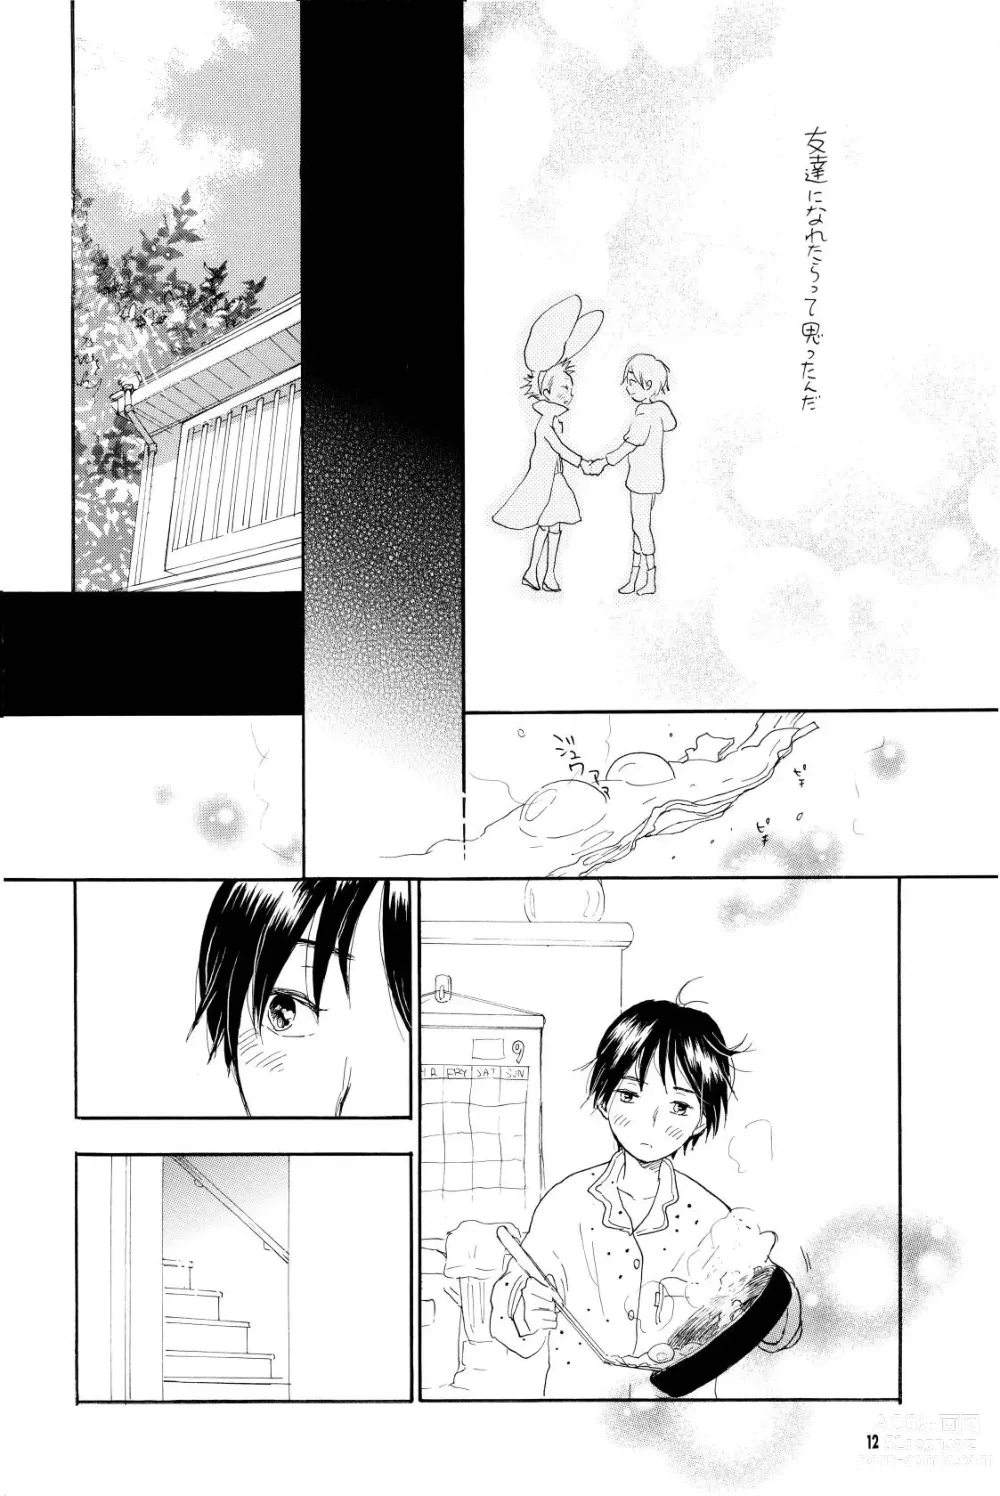 Page 11 of doujinshi your song